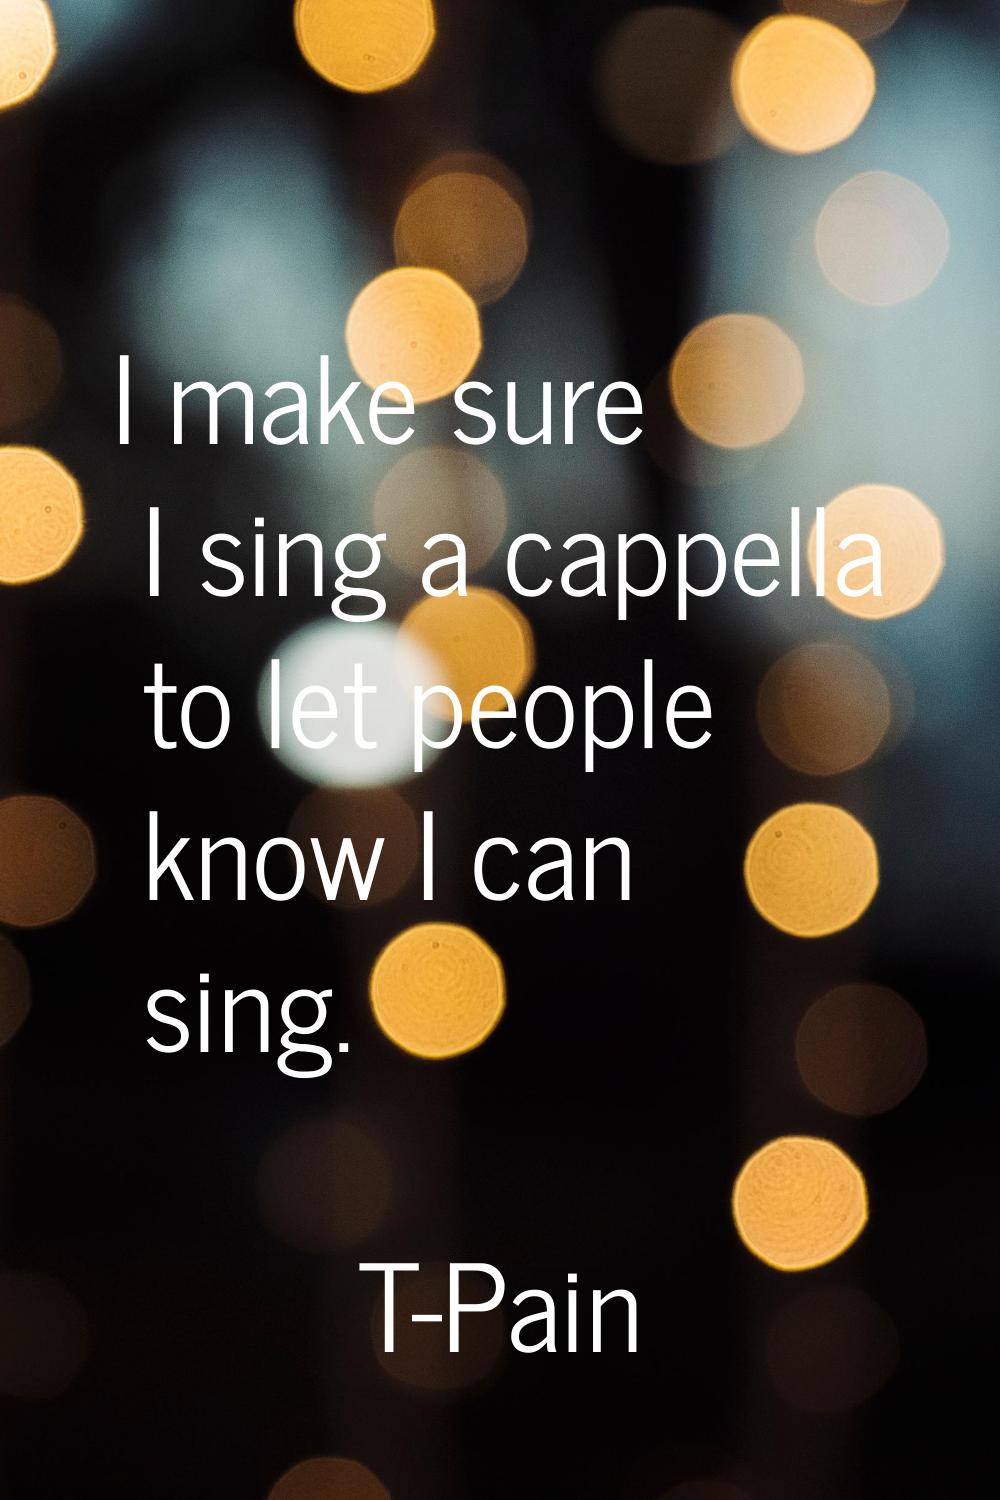 I make sure I sing a cappella to let people know I can sing.